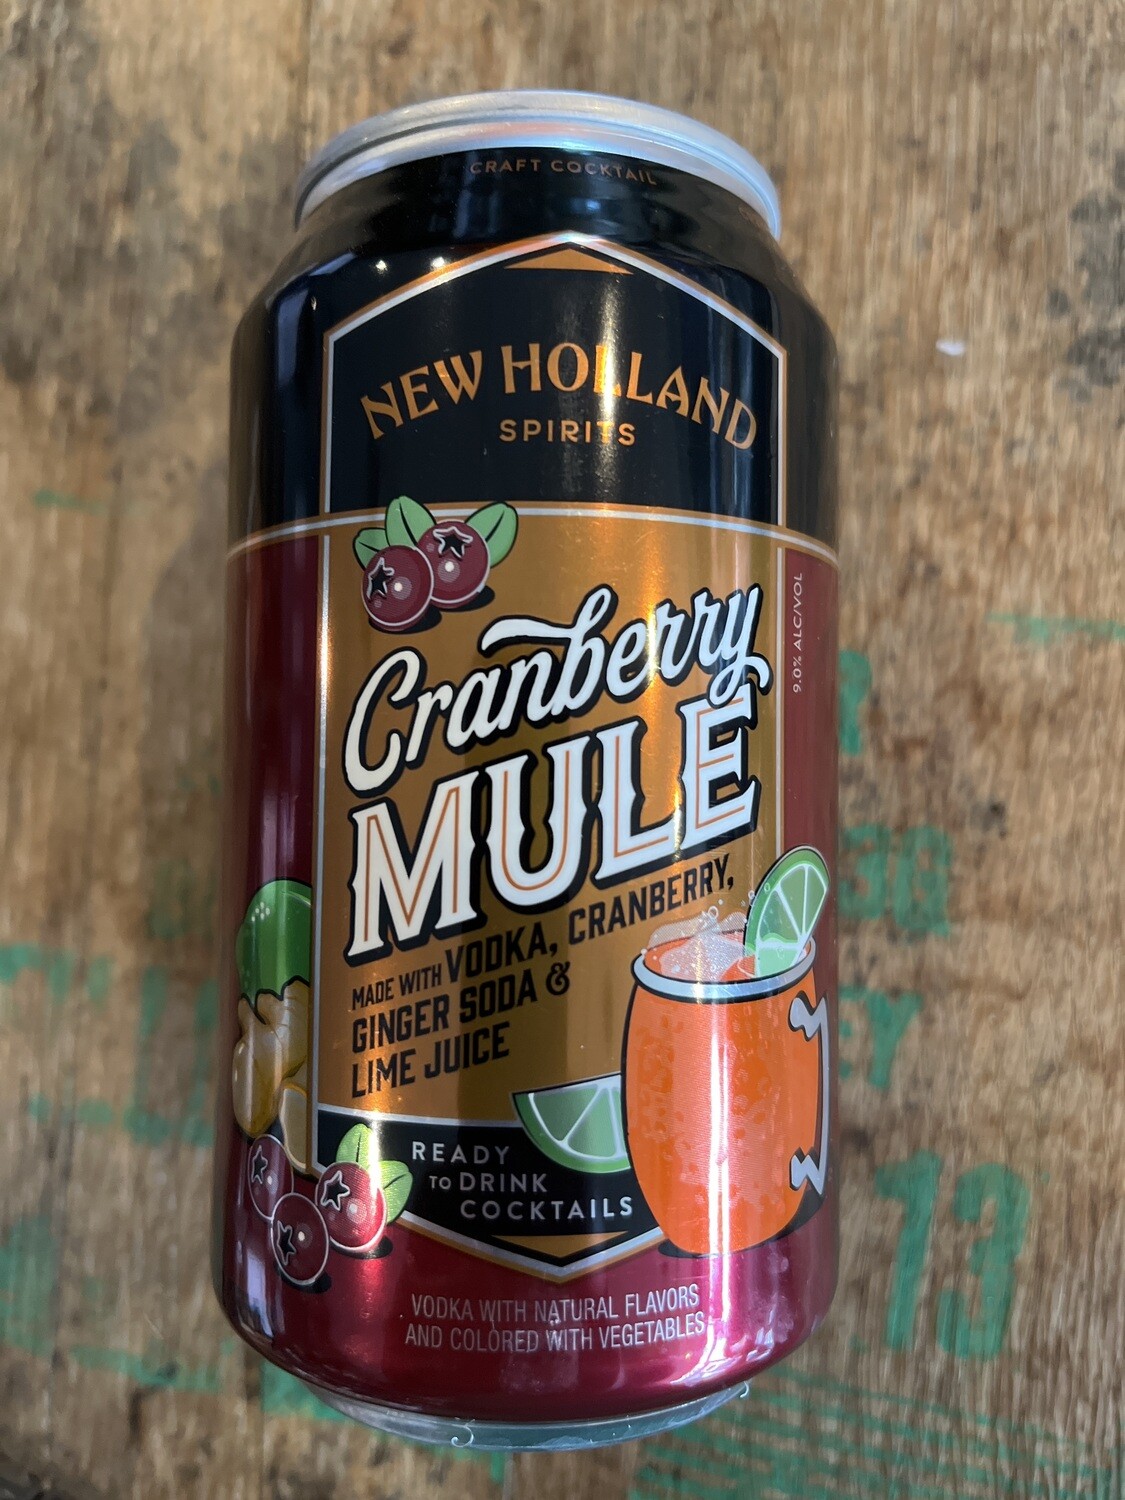 New Holland Cranberry Mule